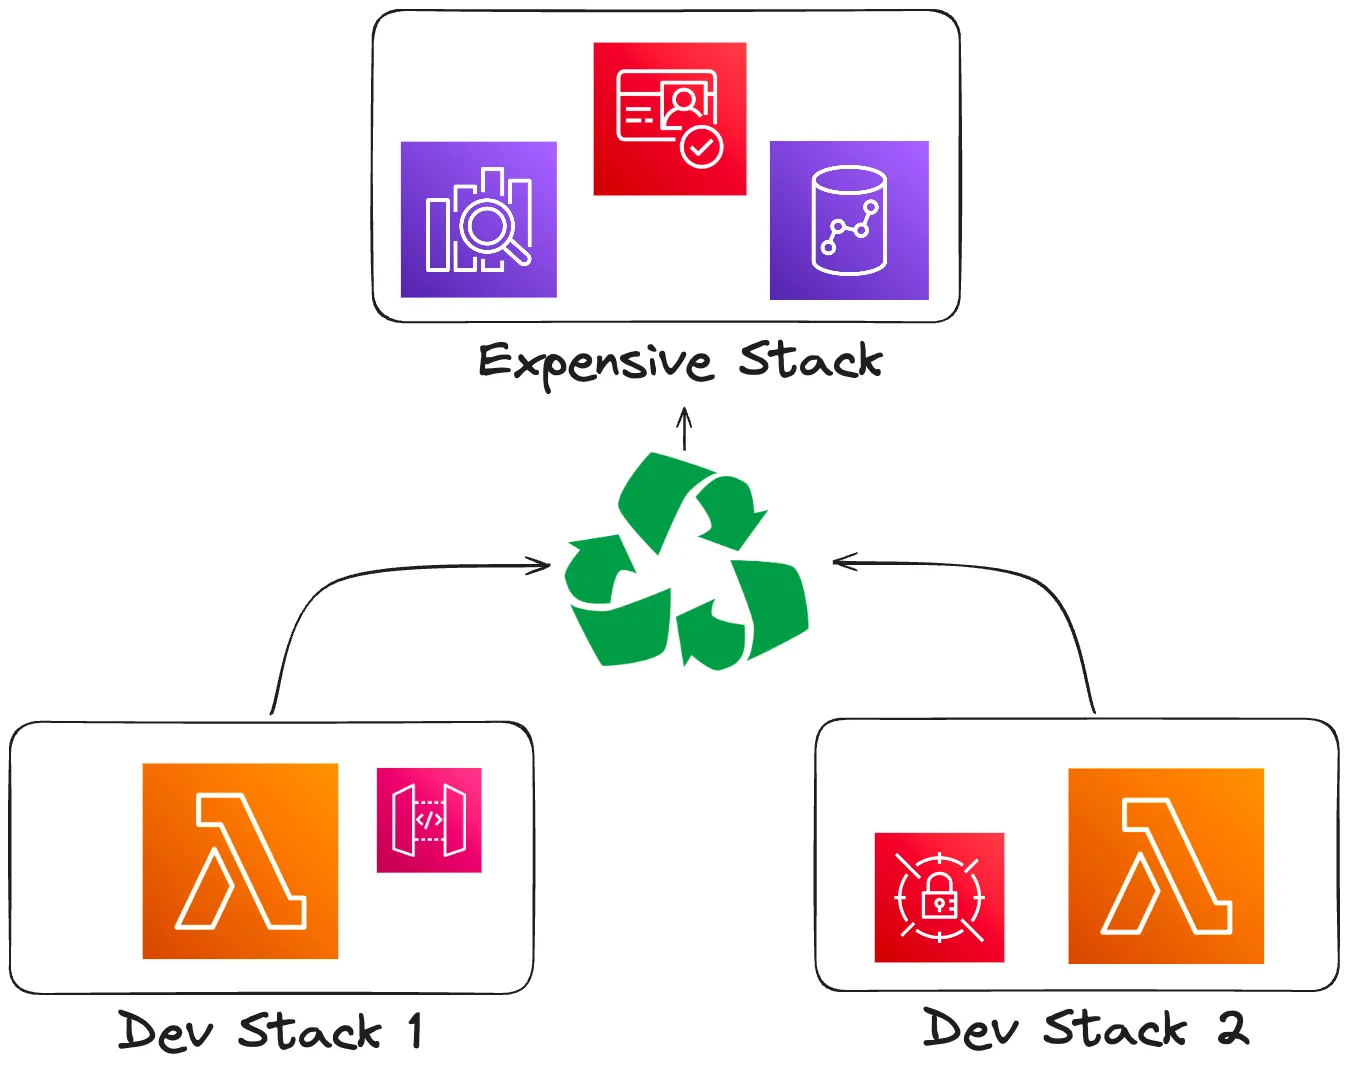 Illustration of cloud development stacks recycling costly infrastructure